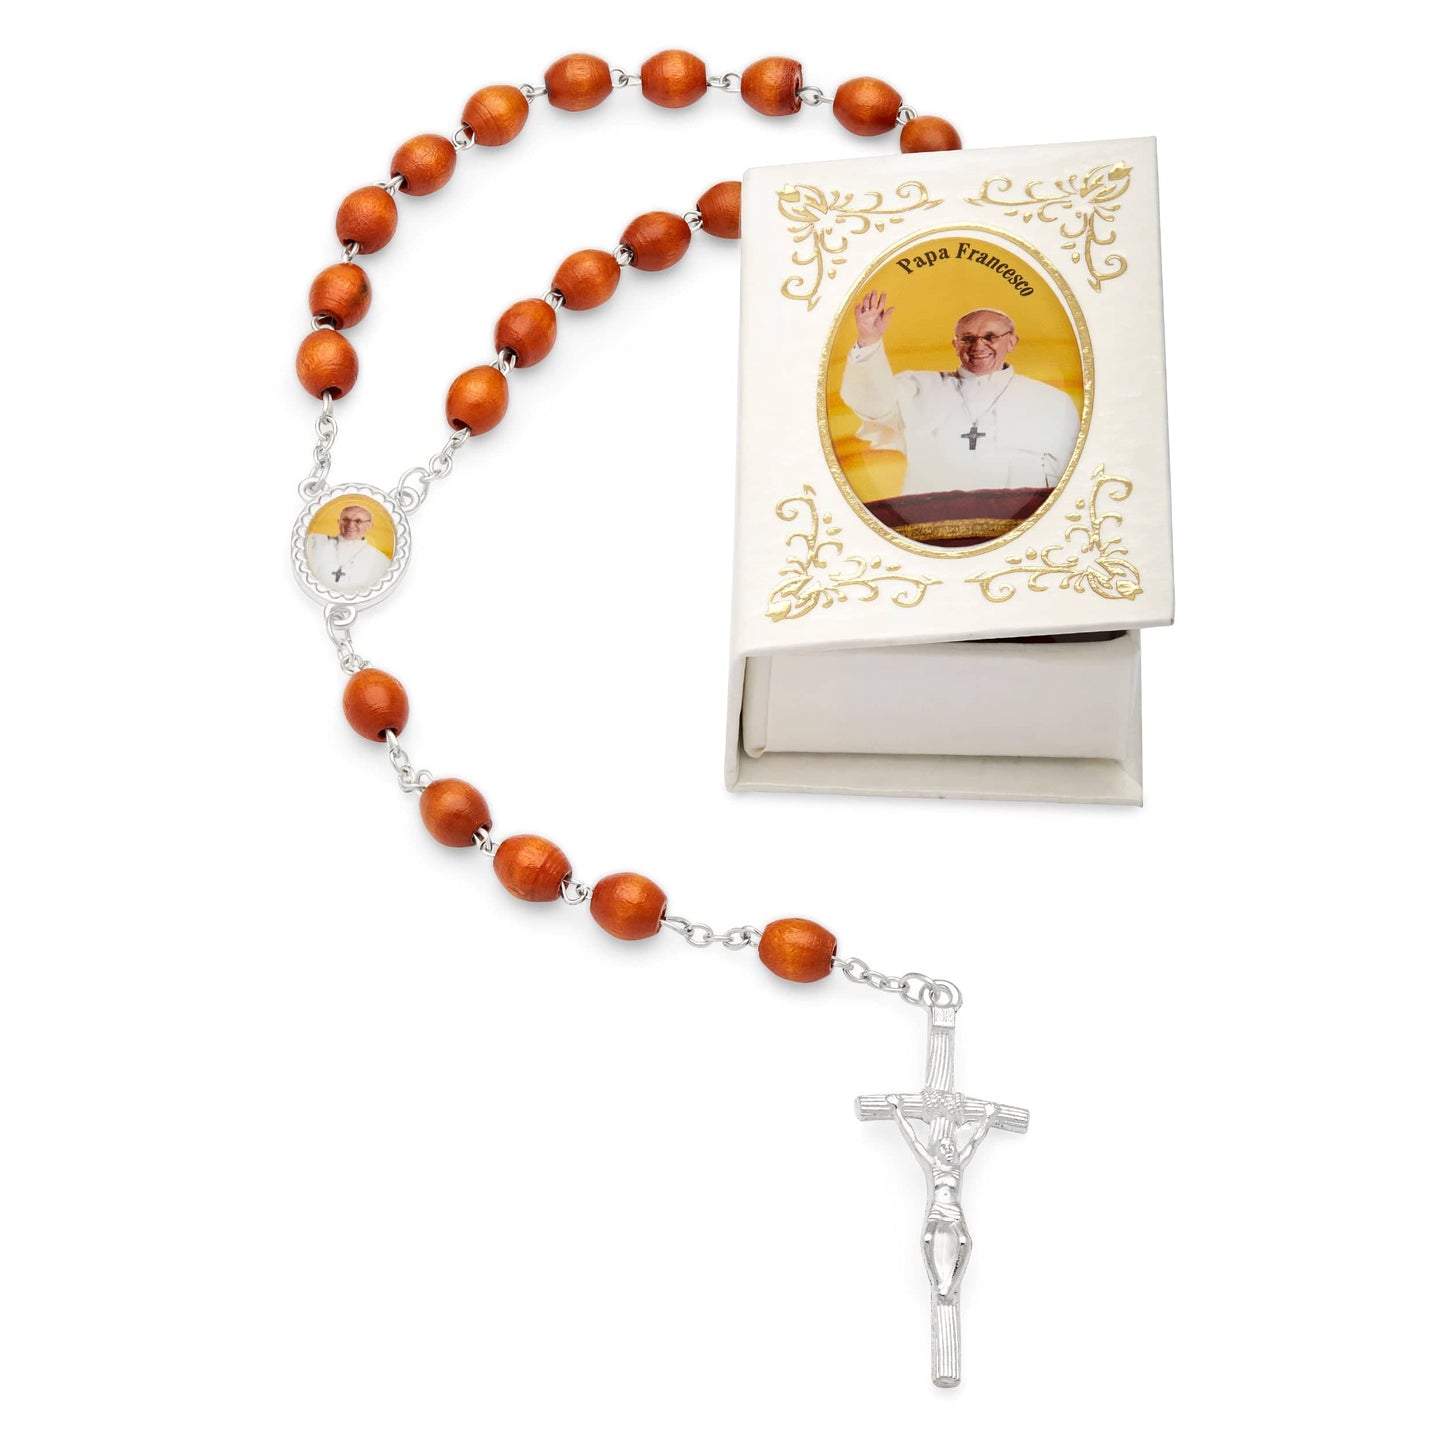 MONDO CATTOLICO Prayer Beads 53 cm (20.90 in) / 7 mm (0.30 in) Pope Francis White Case and Rosary